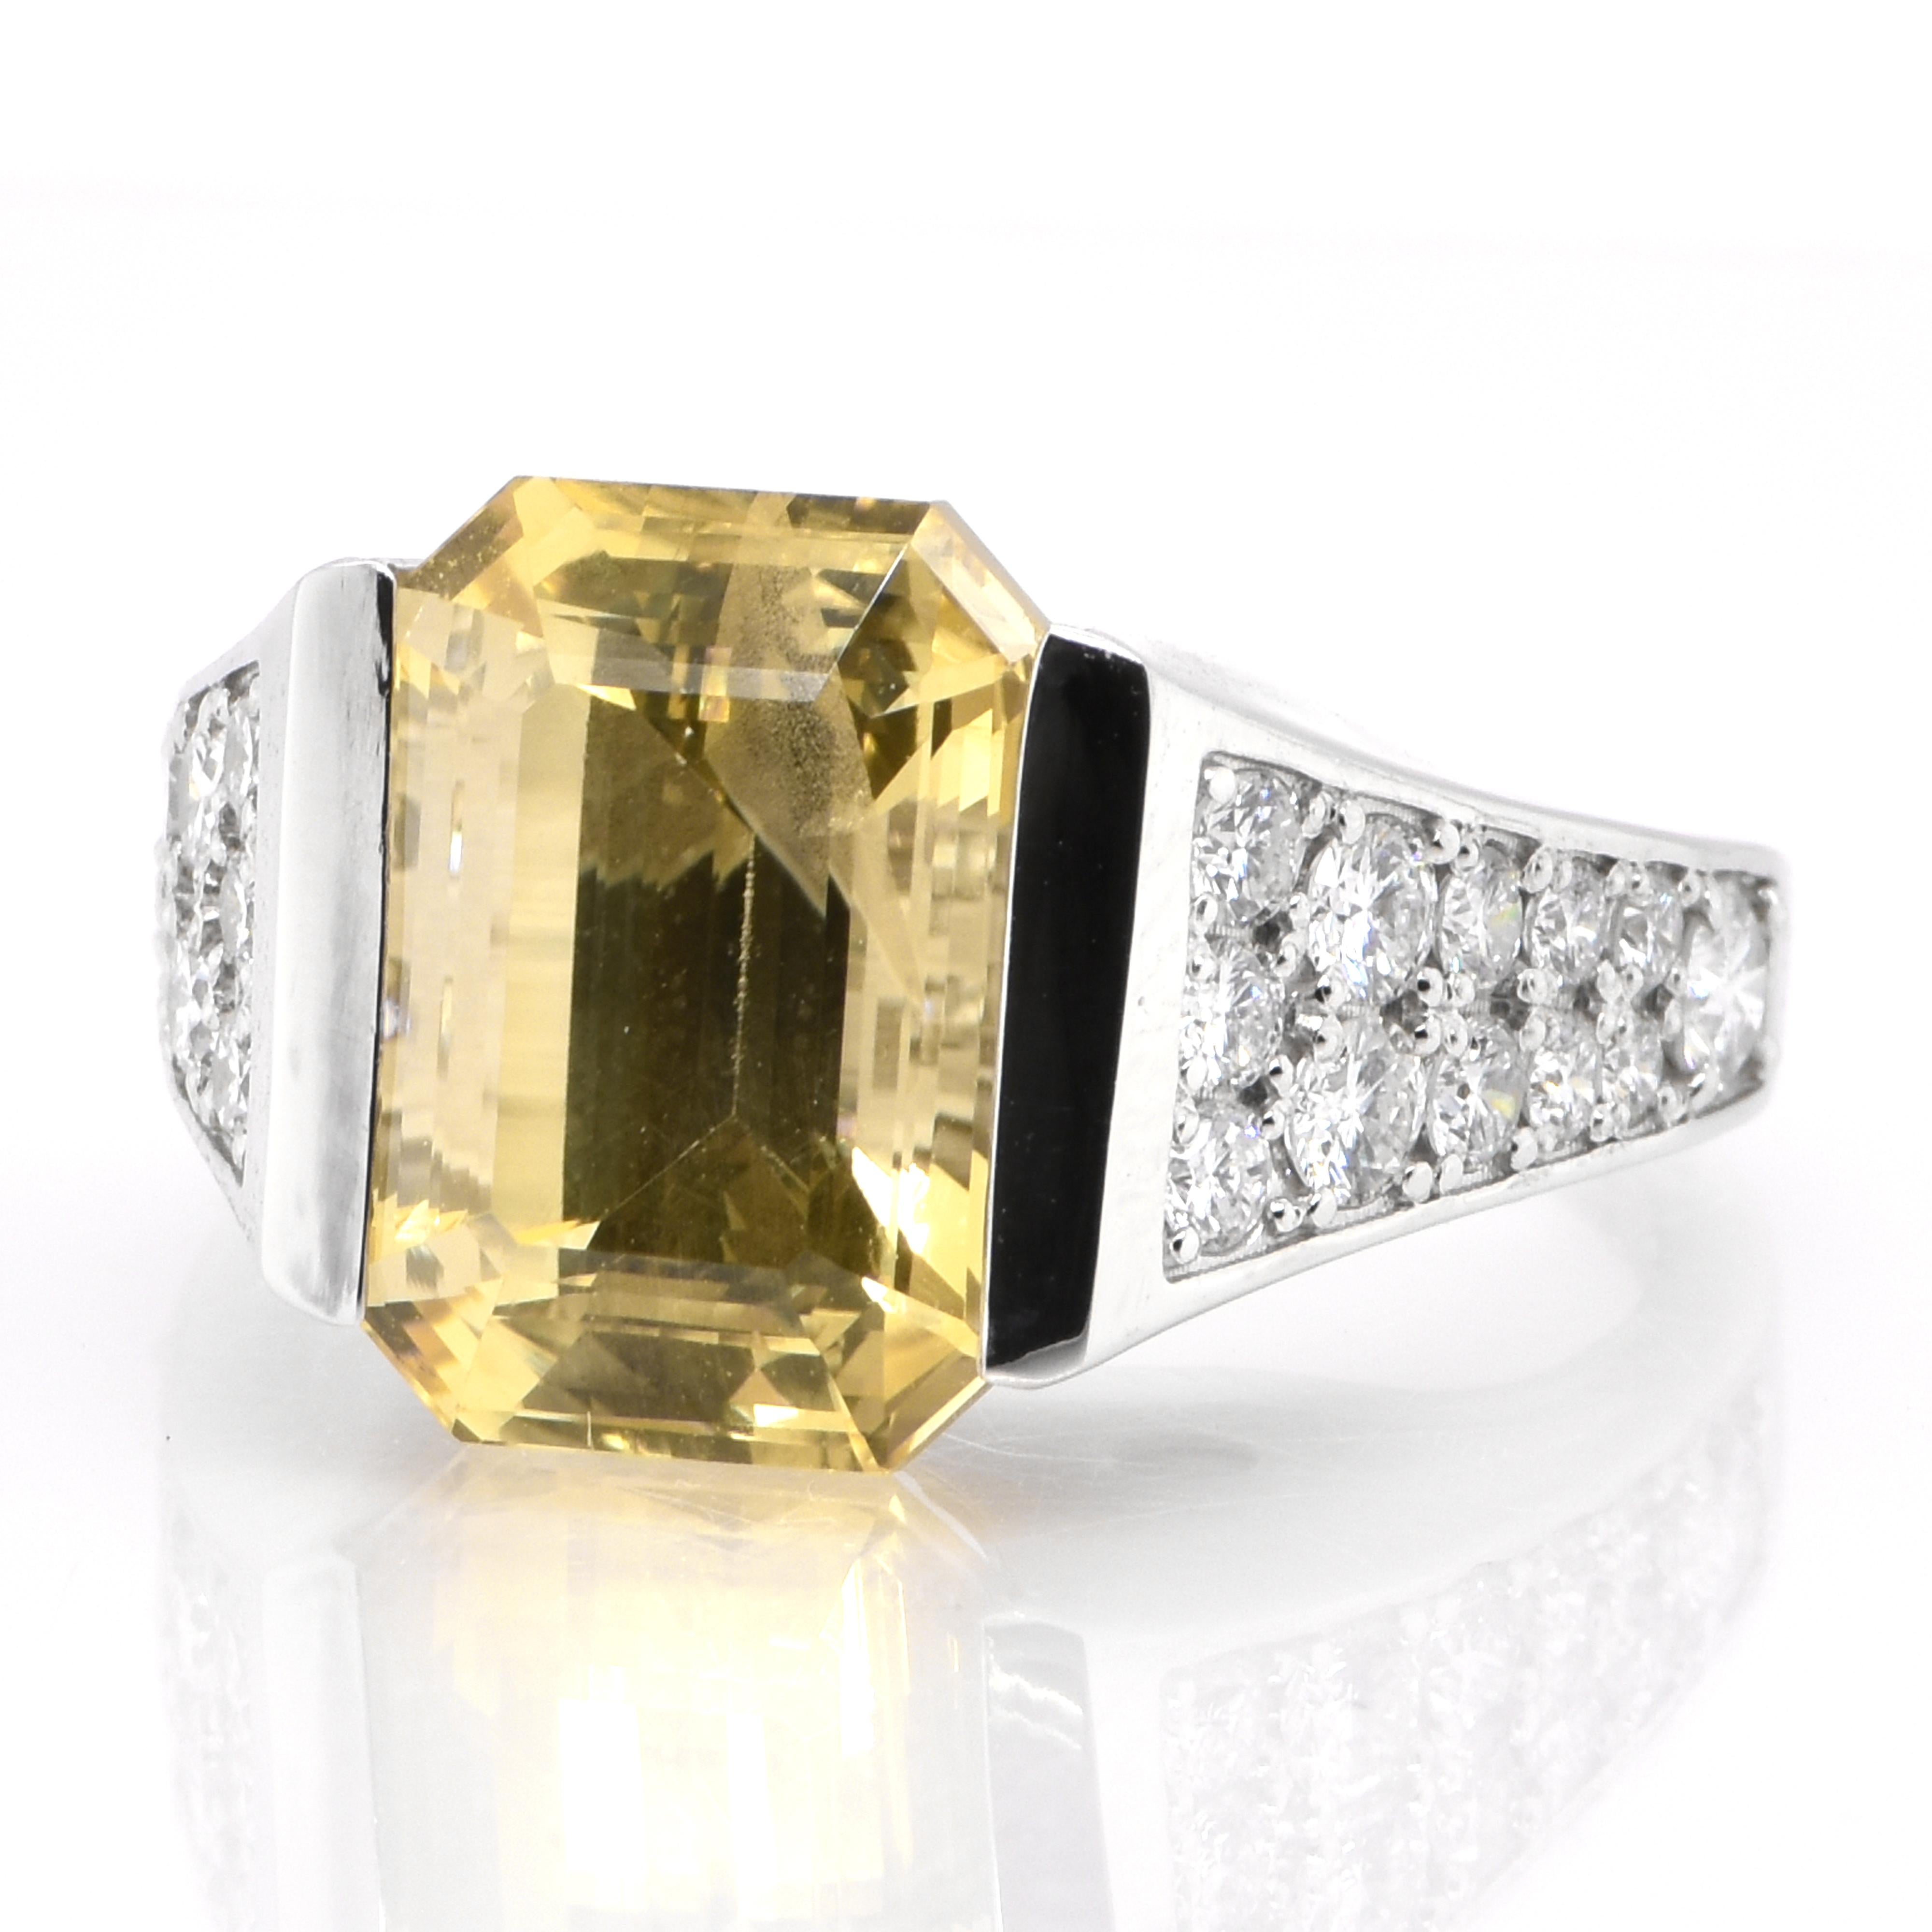 A beautiful ring featuring 8.80 Carat Natural Untreated Yellow Sapphire and 1.01 Carats Diamond Accents set in Platinum. Sapphires have extraordinary durability - they excel in hardness as well as toughness and durability making them very popular in